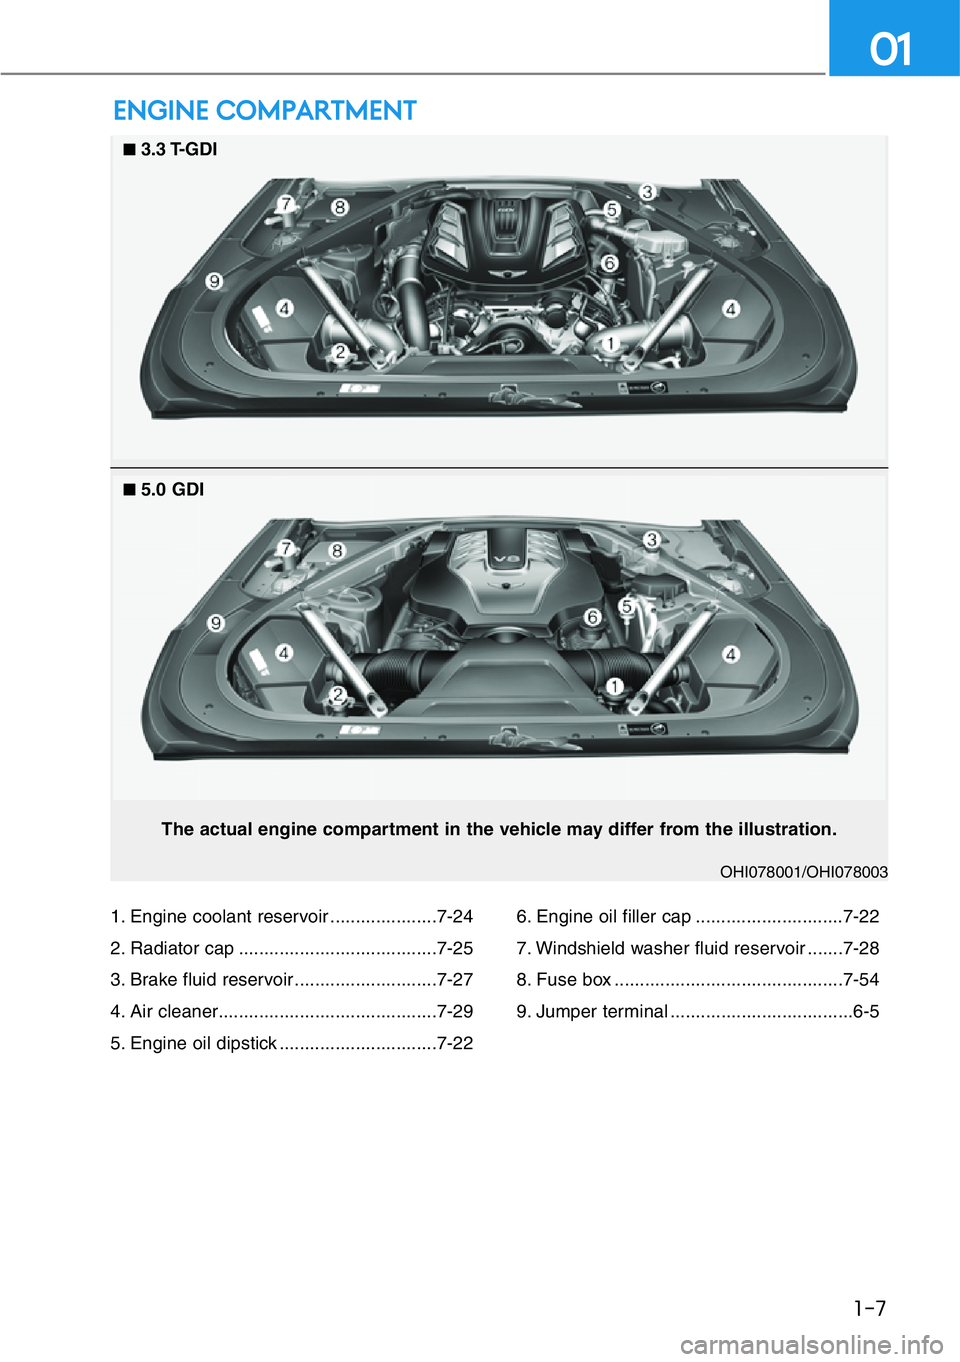 HYUNDAI GENESIS G90 2016 User Guide ENGINE COMPARTMENT
OHI078001/OHI078003
The actual engine compartment in the vehicle may differ from the illustration.
1-7
01
1. Engine coolant reservoir .....................7-24
2. Radiator cap .....